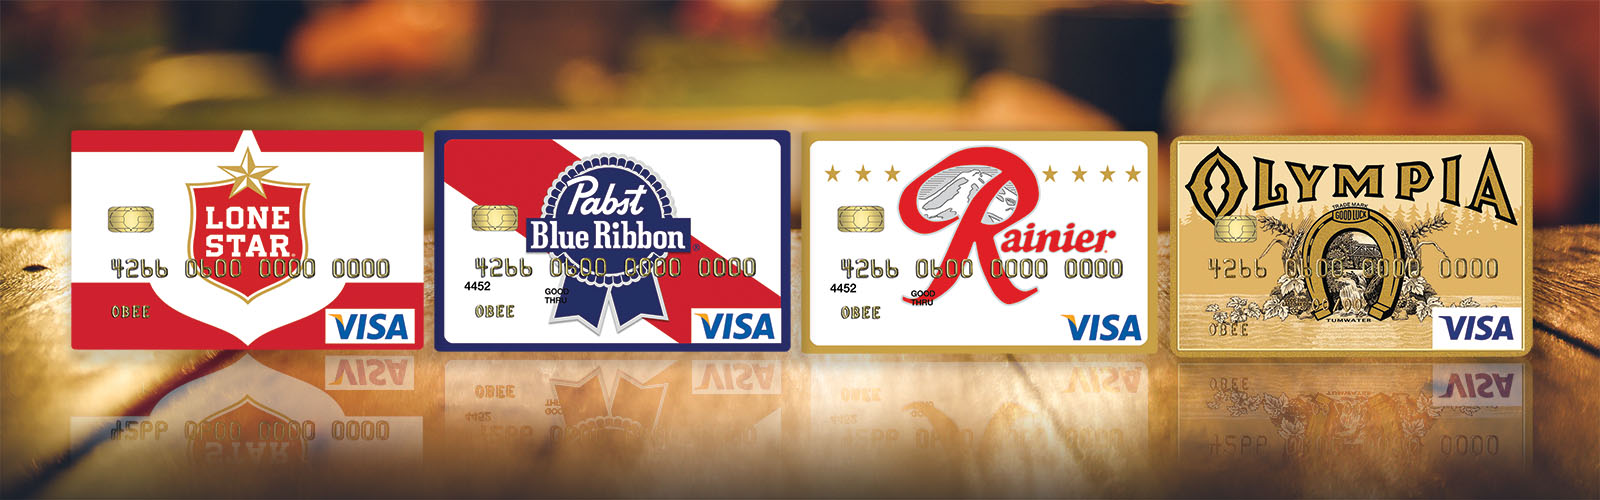 Pabst Blue Ribbon family Credit Cards, Lone Start Credit Card, PBR Credit Card, Pabst Blue Ribbon Credit Card, Rainier Credit Card, Rainier logo credit card